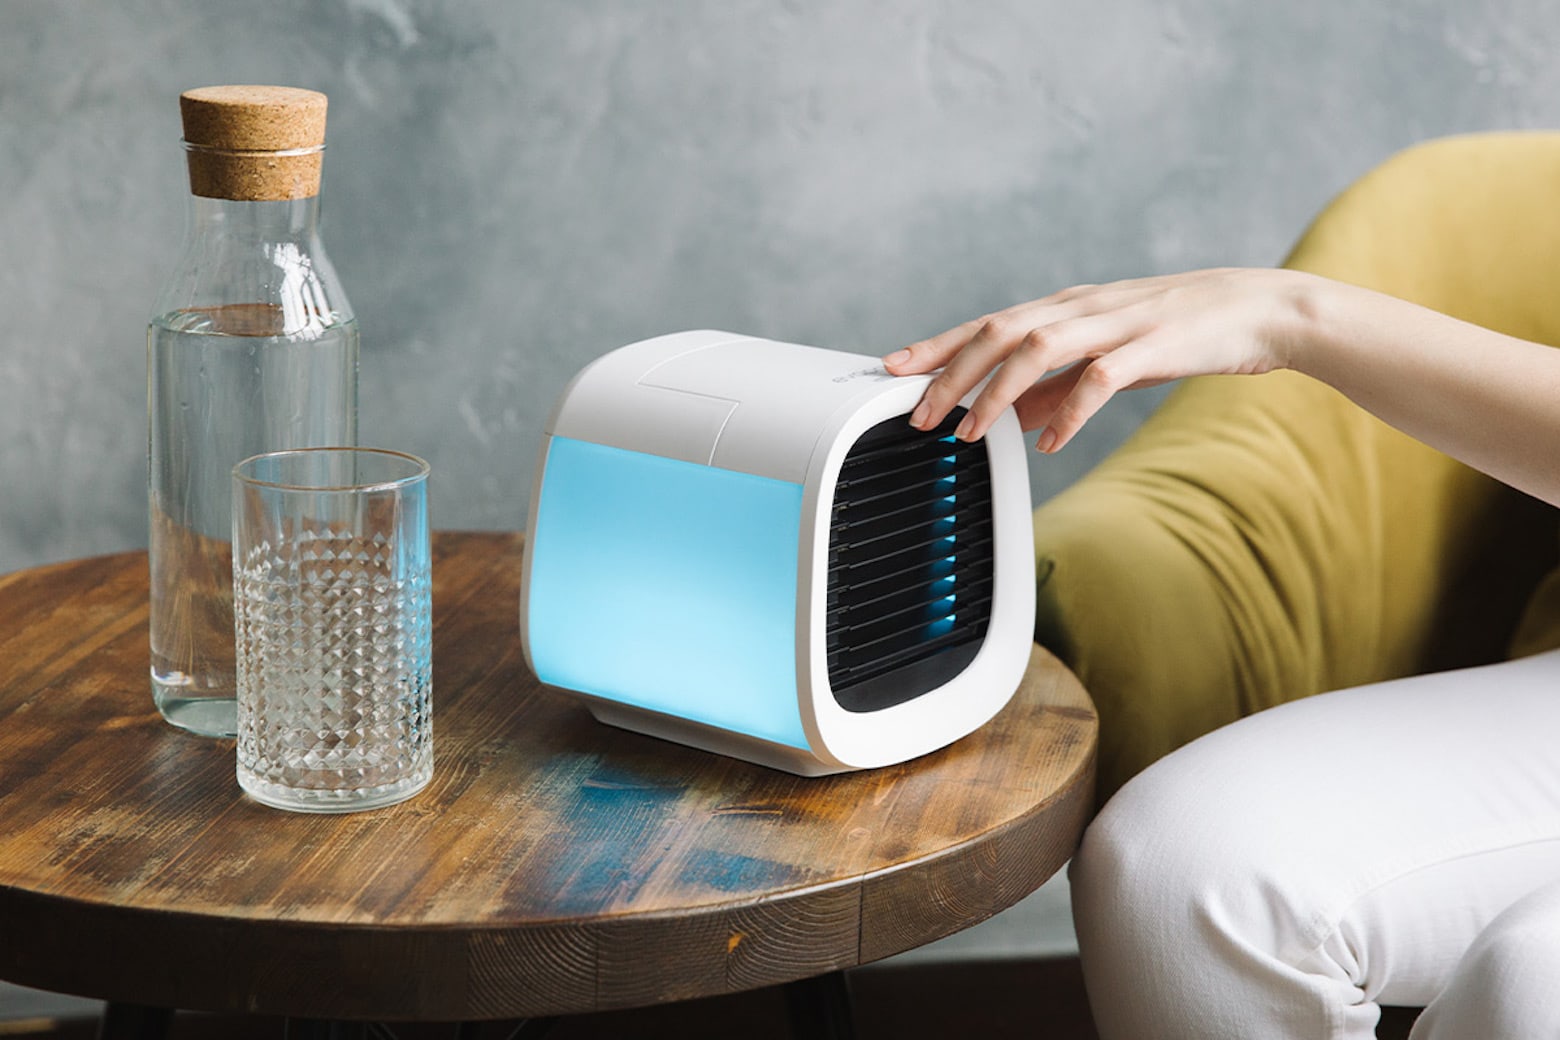 Keep cool this summer with nearly $30 off this portable AC